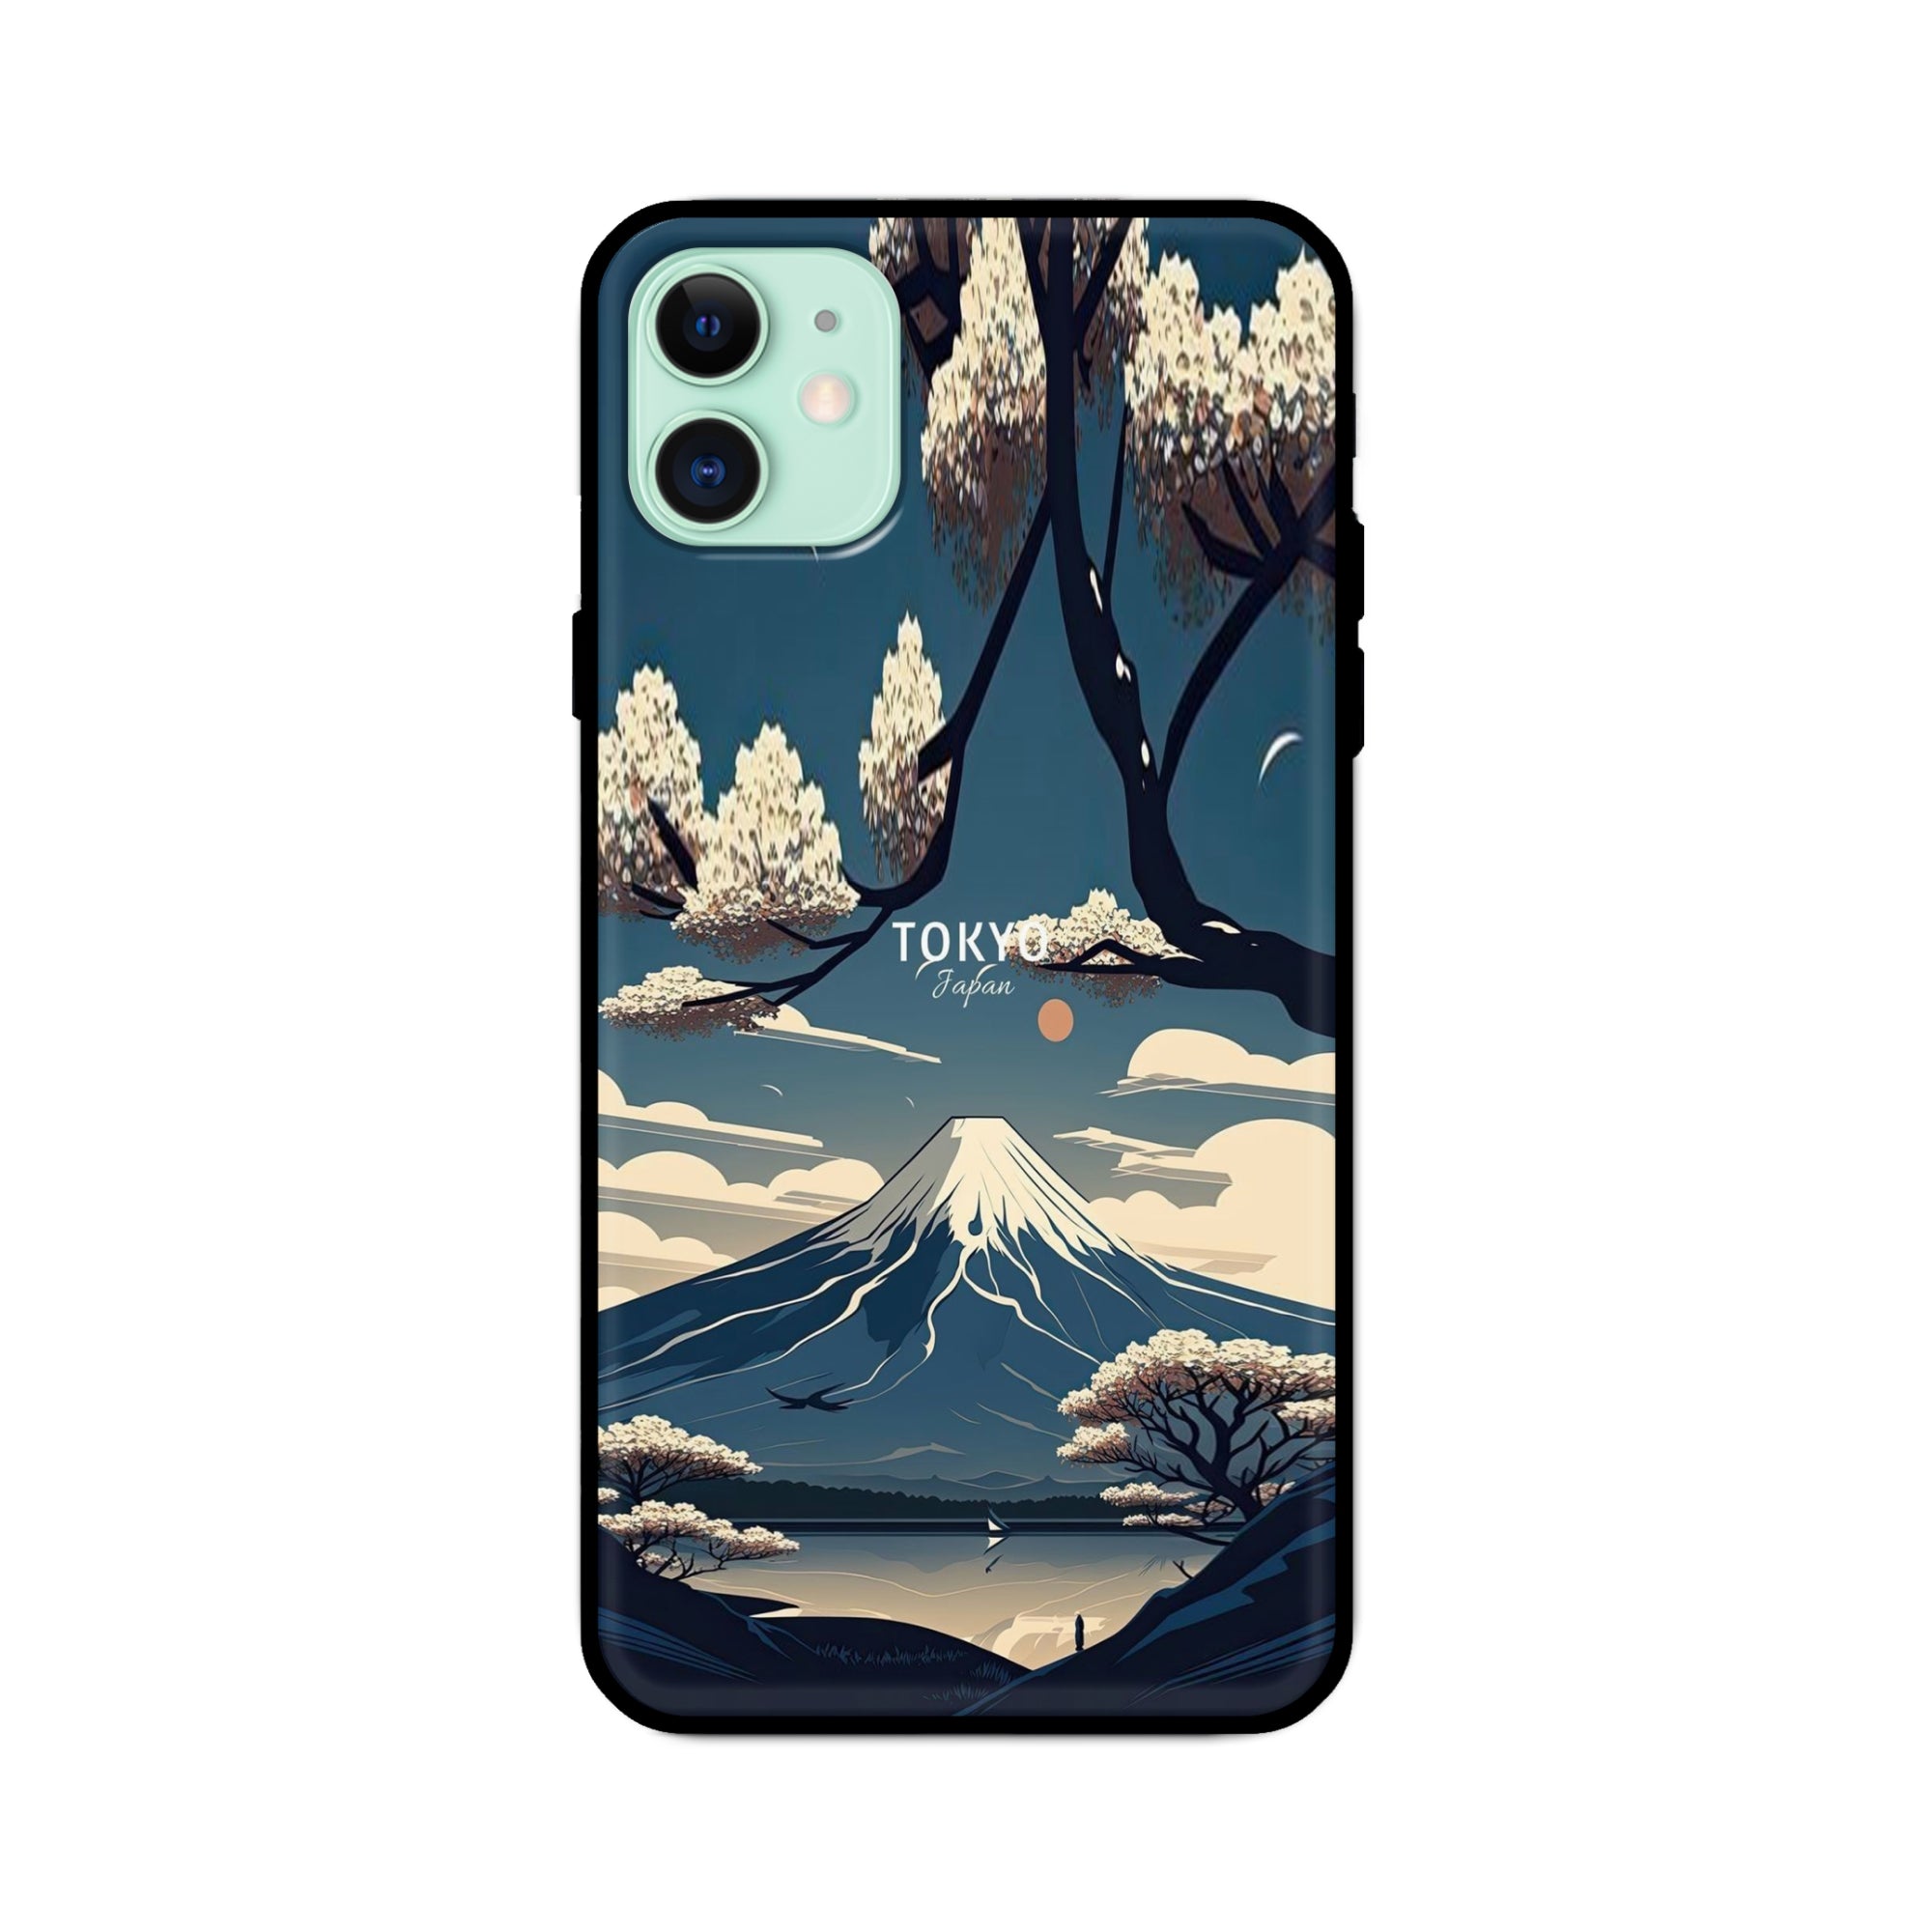 Buy Tokyo Glass/Metal Back Mobile Phone Case/Cover For iPhone 11 Online